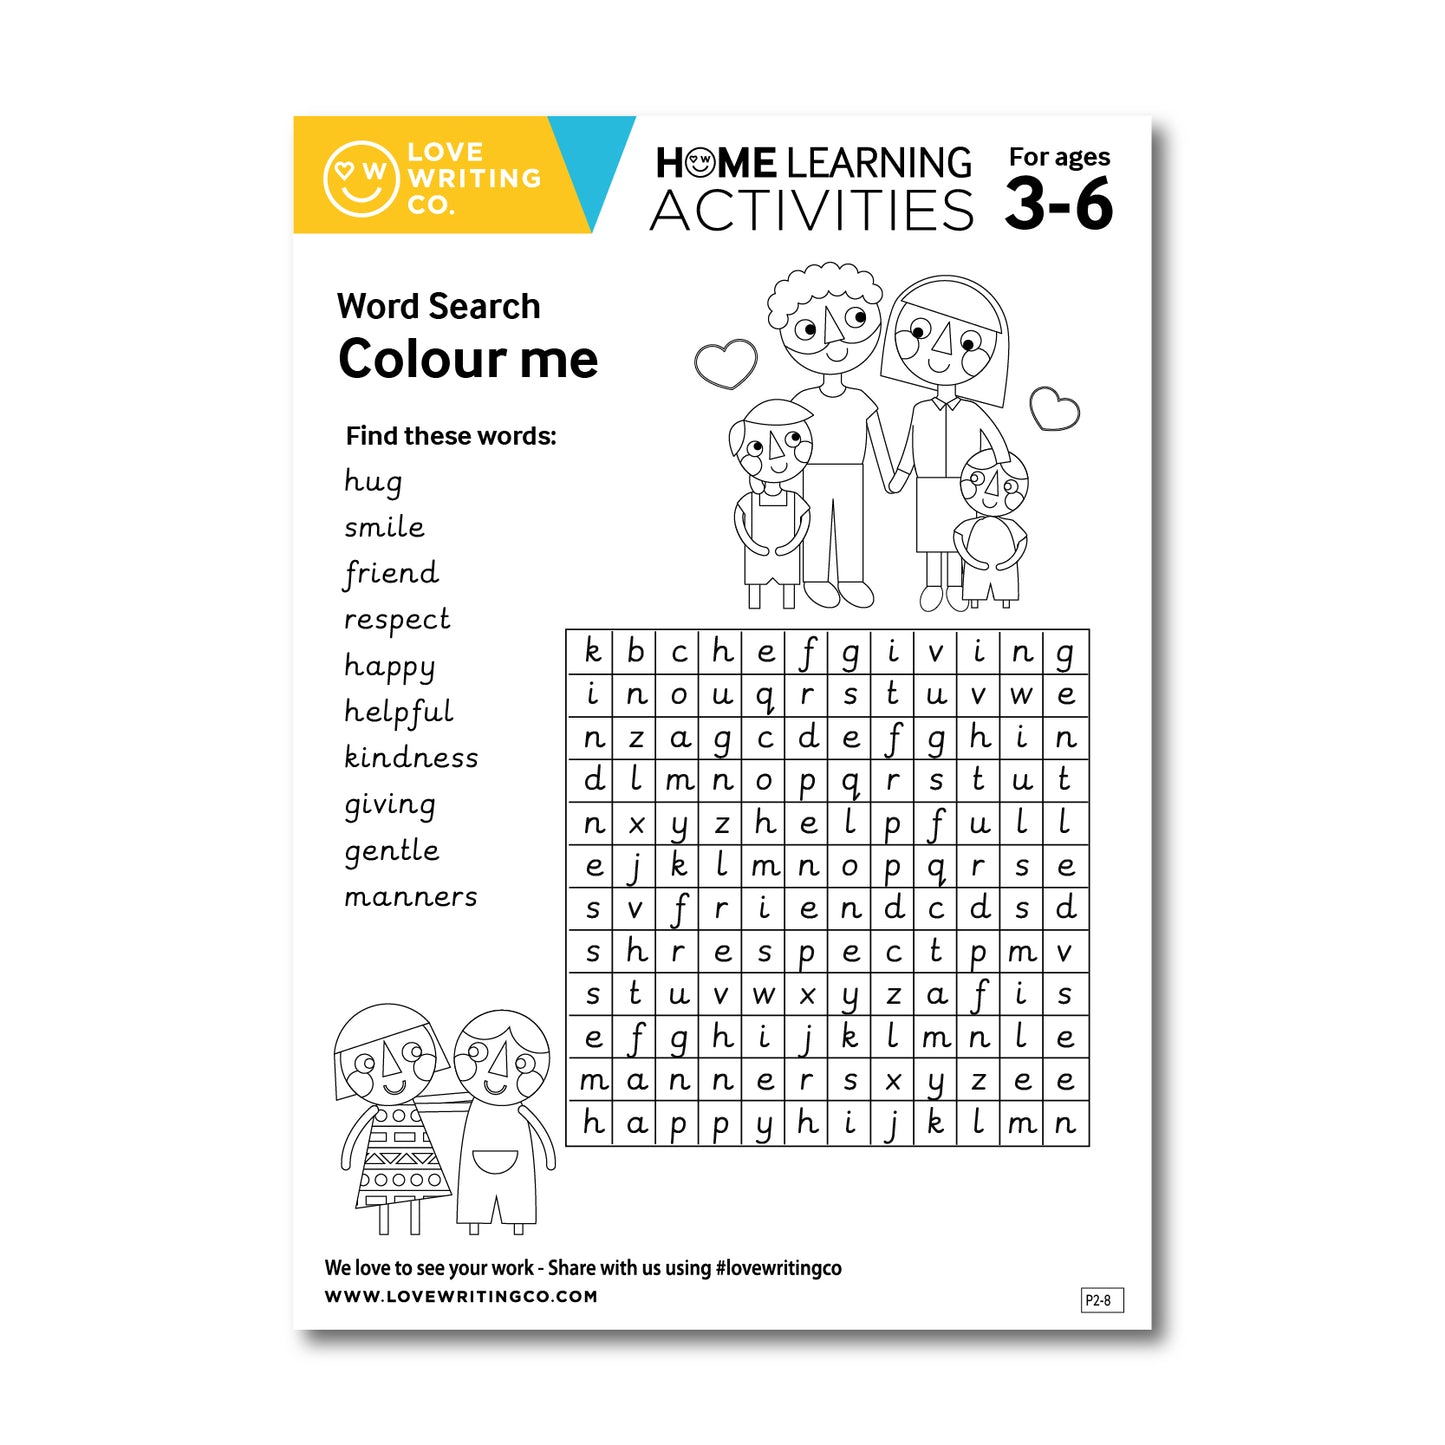 Word search colour me activities by Love Writing Co